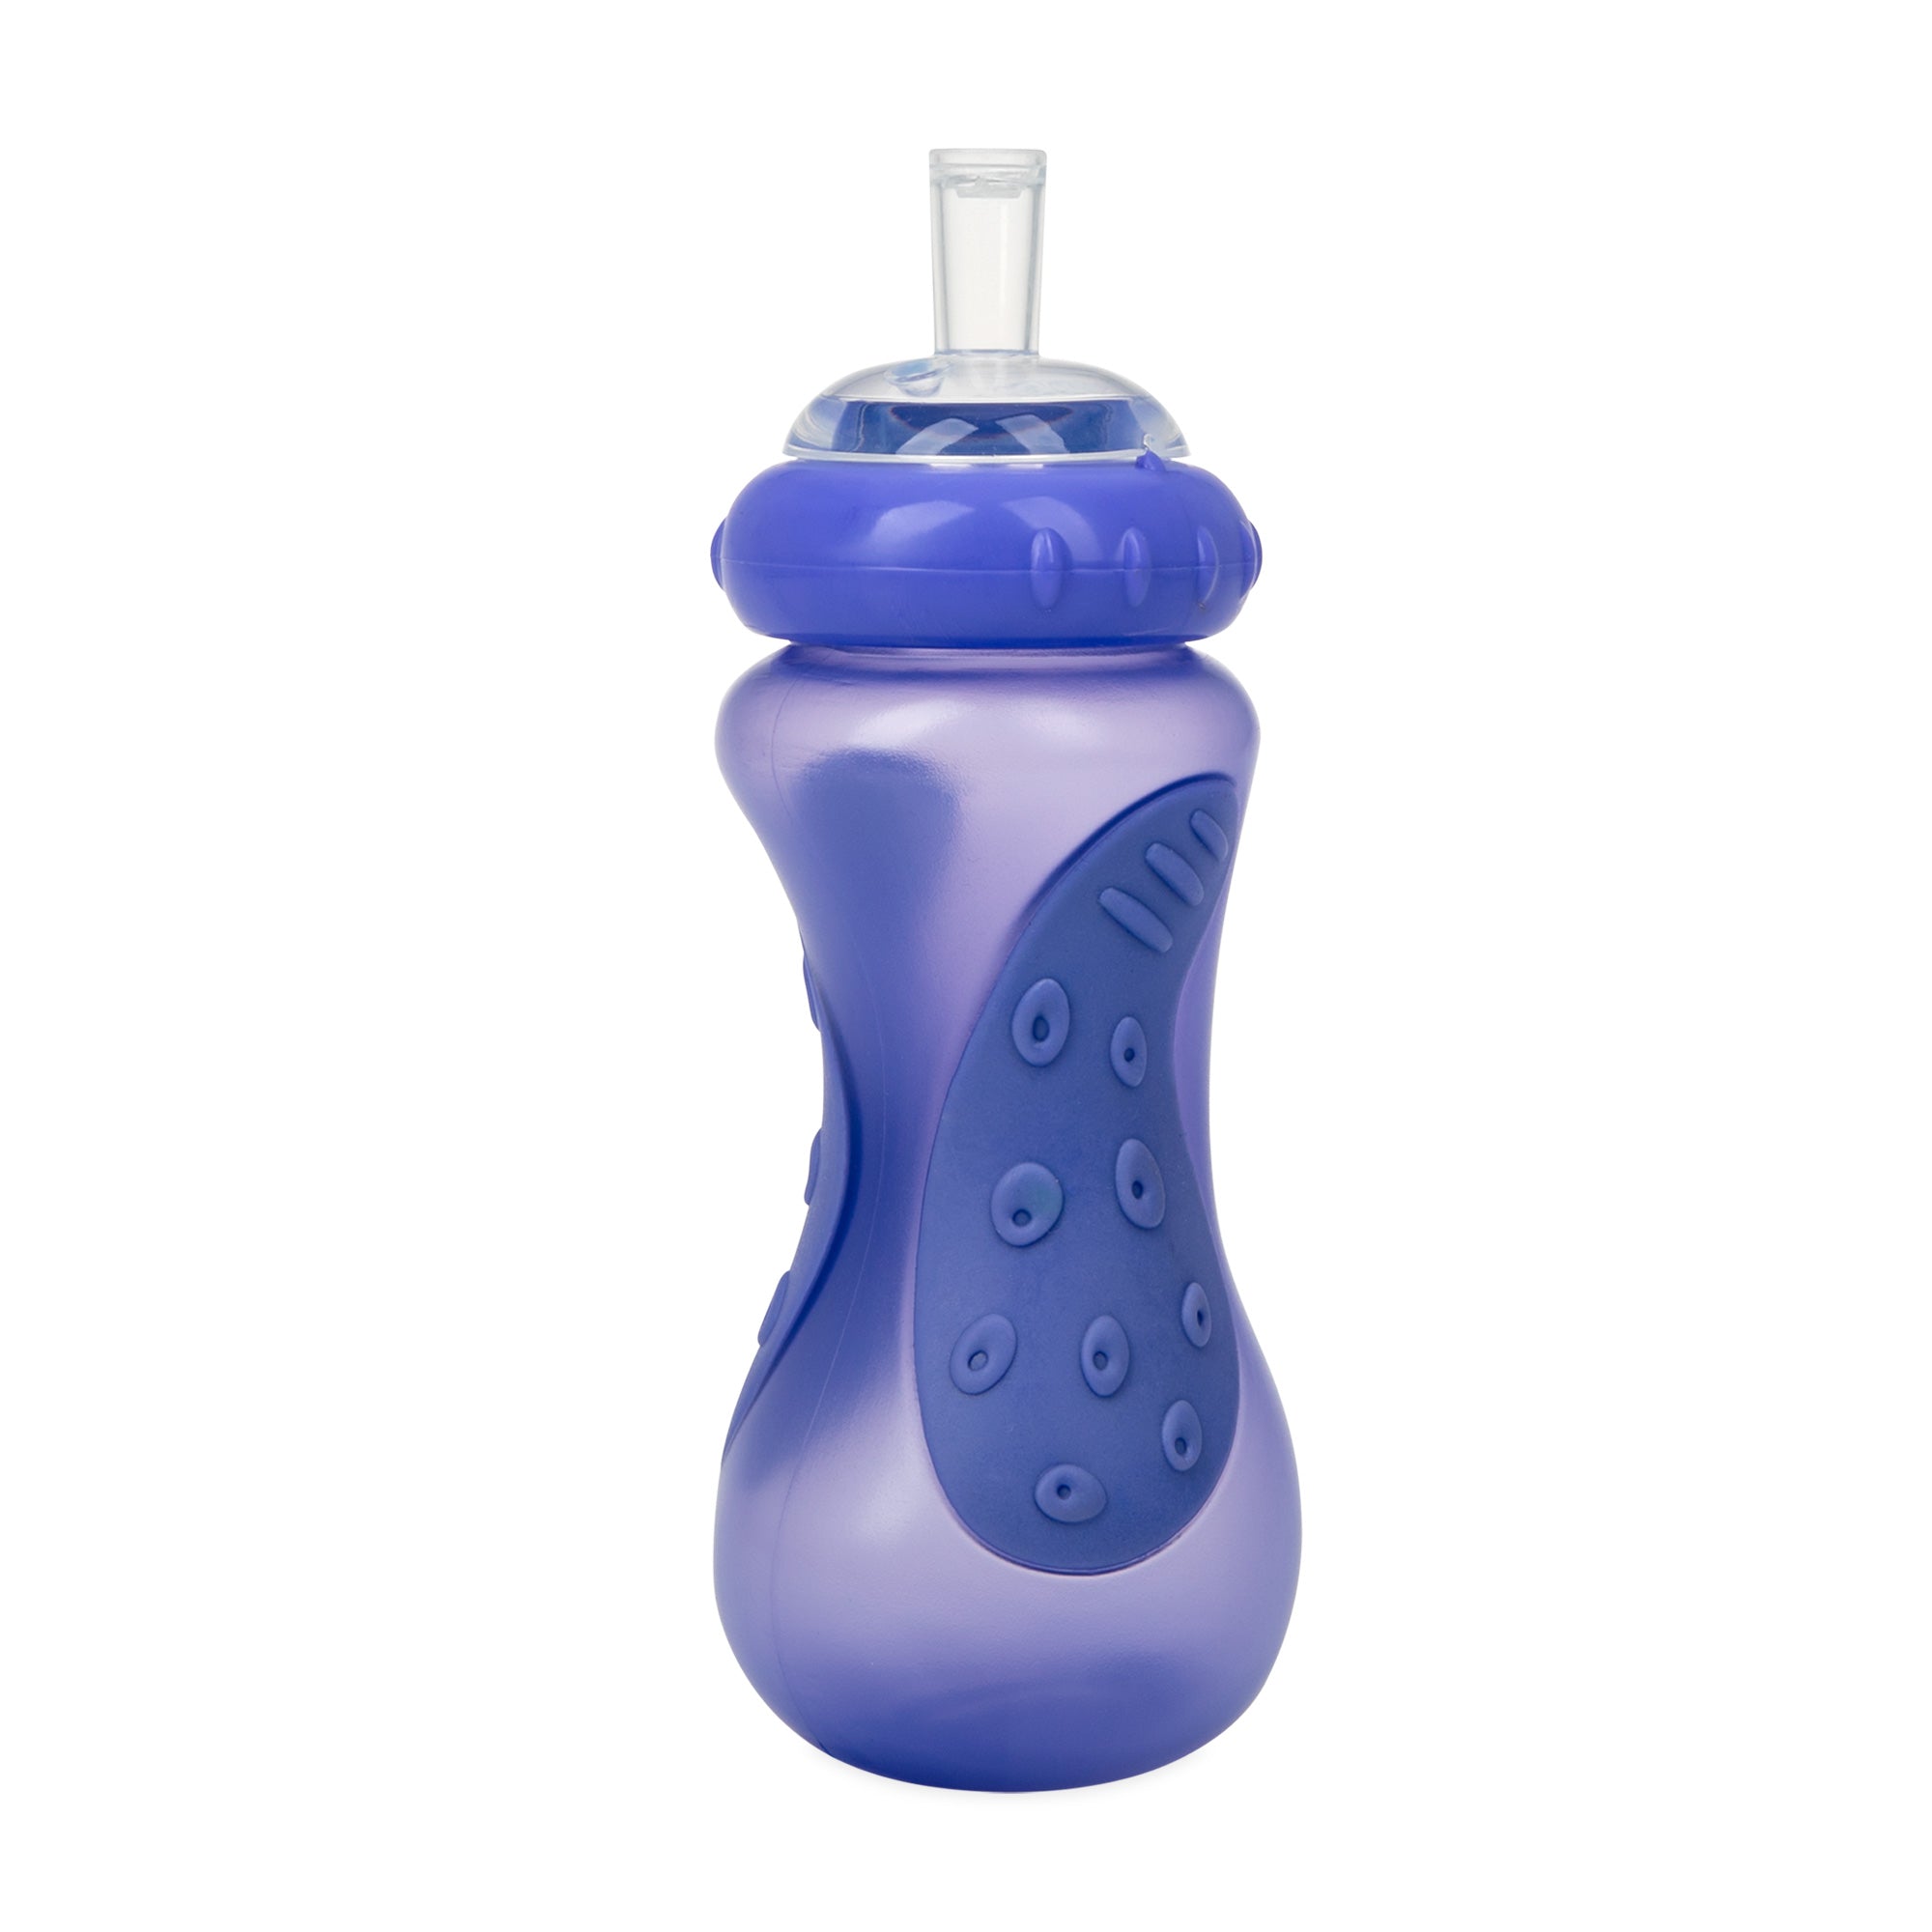 Worry-Free Sips with Sport Sipper: Non-Spill Sippy Cup for Kids